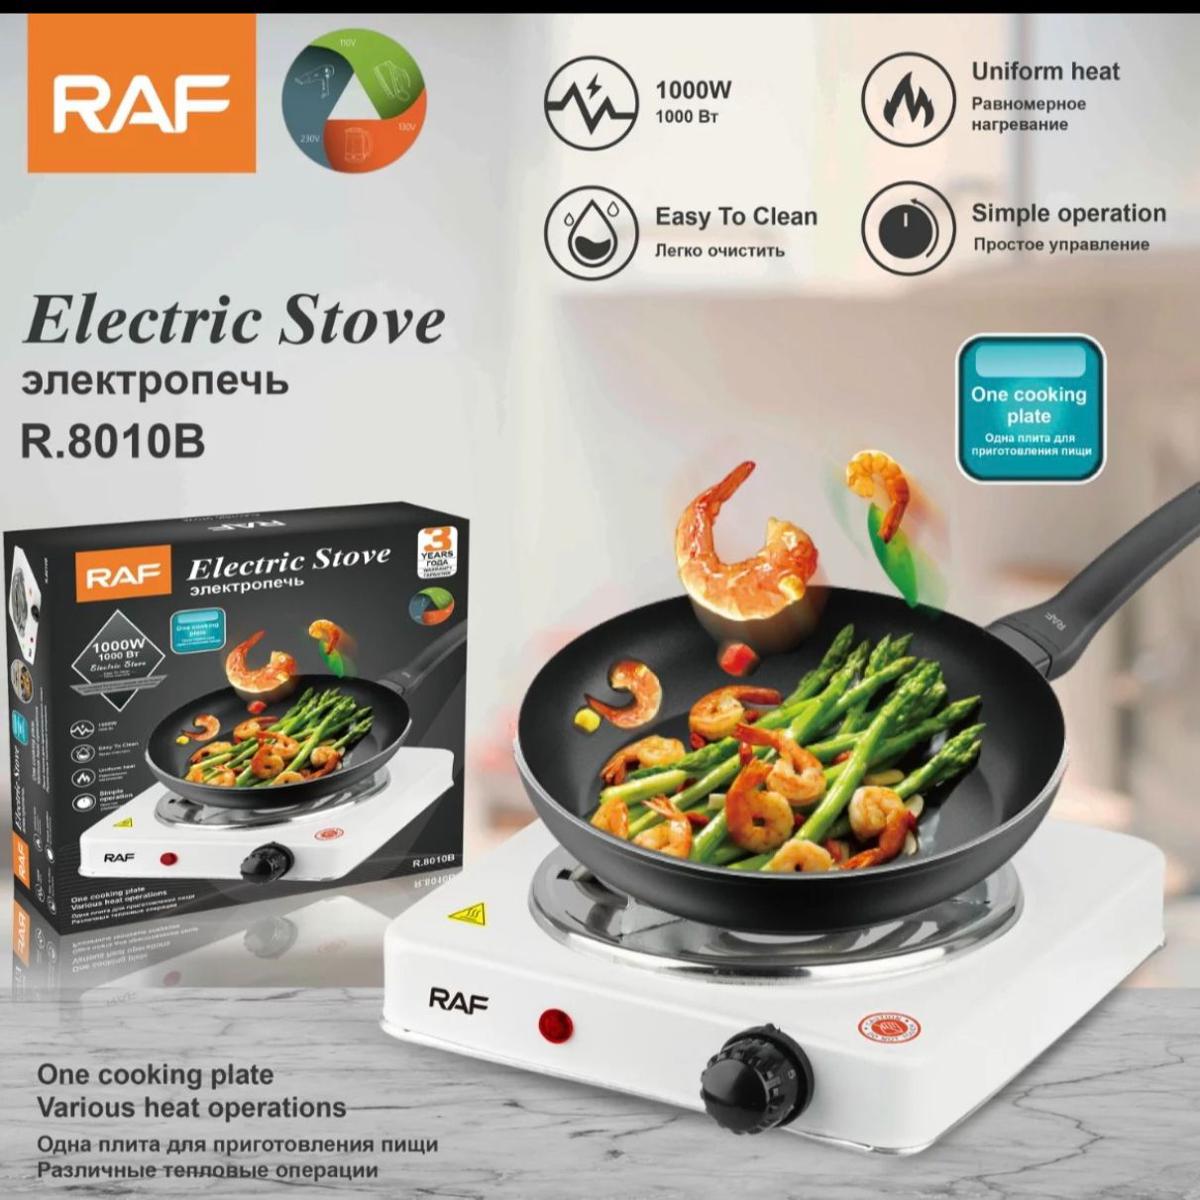 Electric Stove & Hot Plate & Cooker  with Uniform Heating